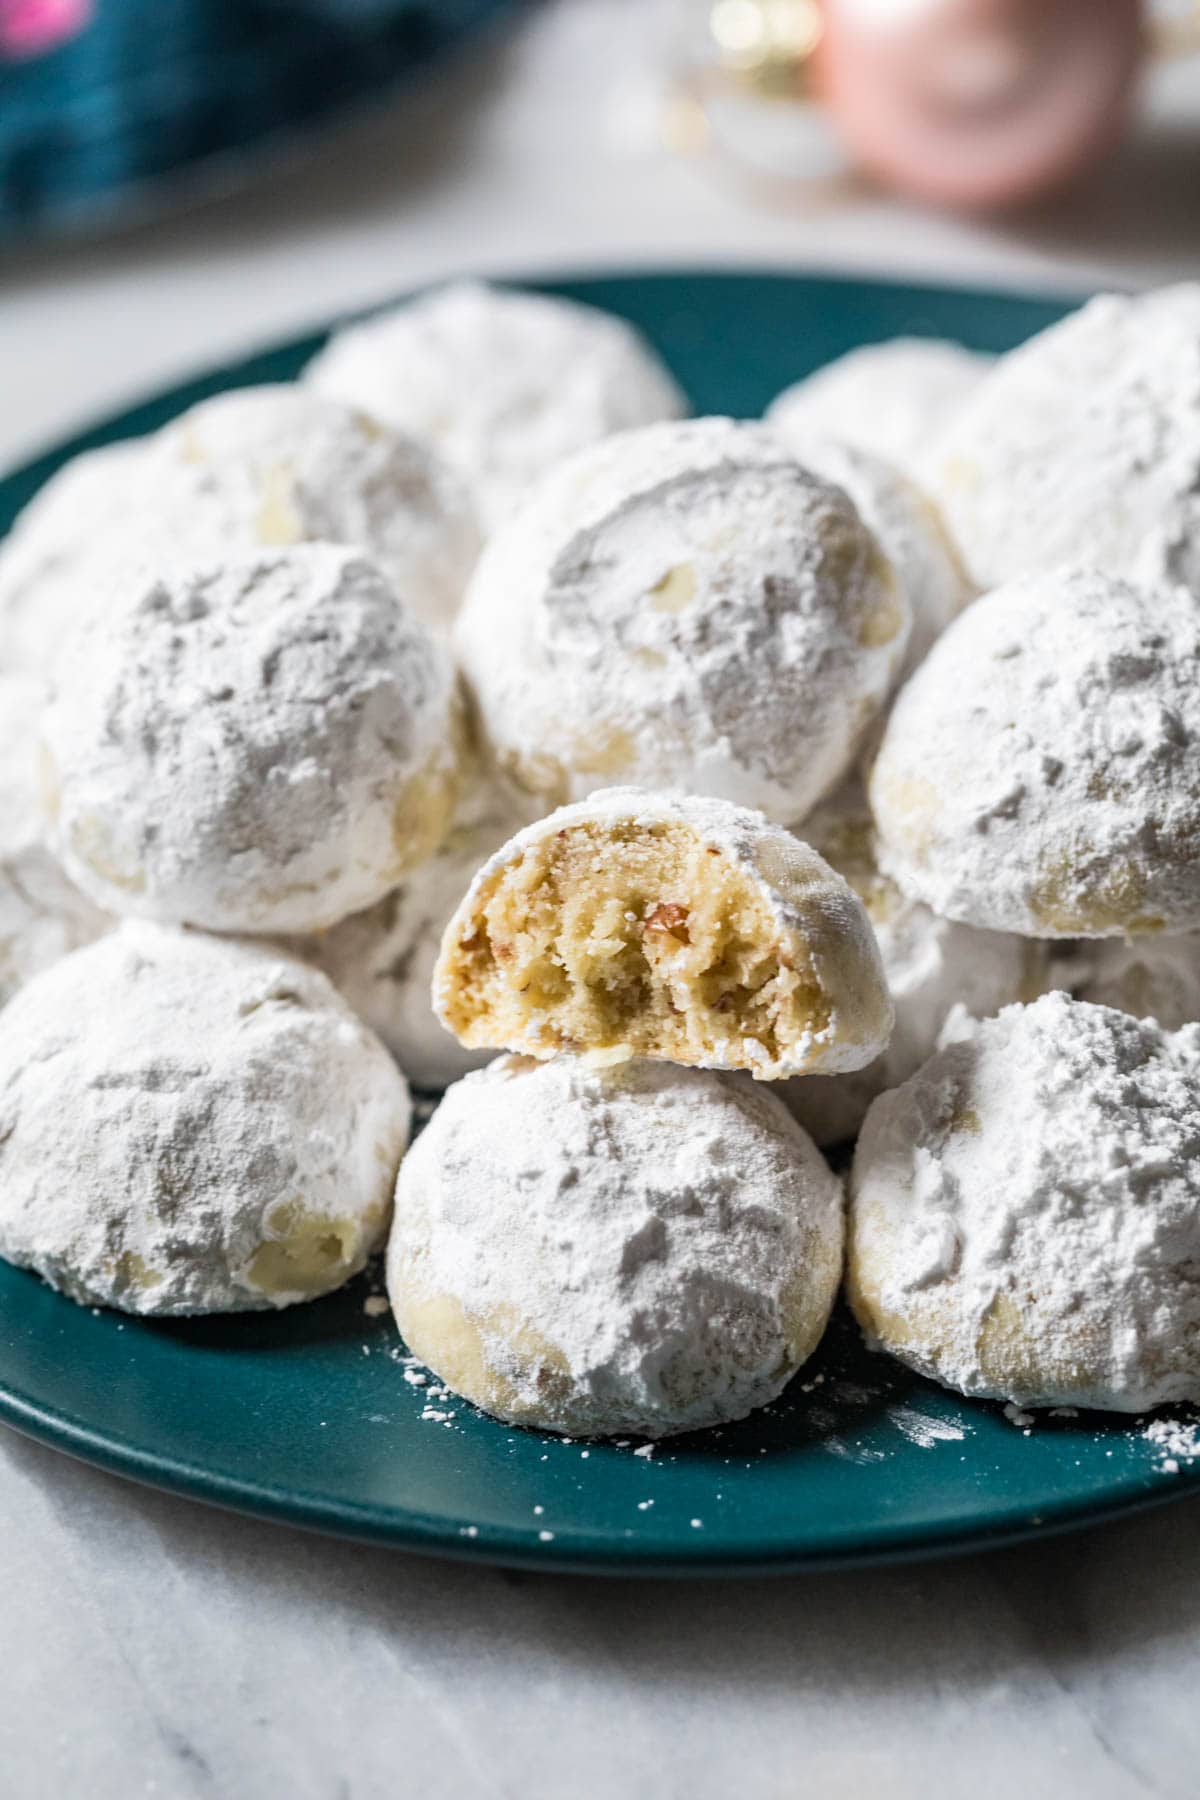 Plate of snowball cookies with one cookie missing a bite.